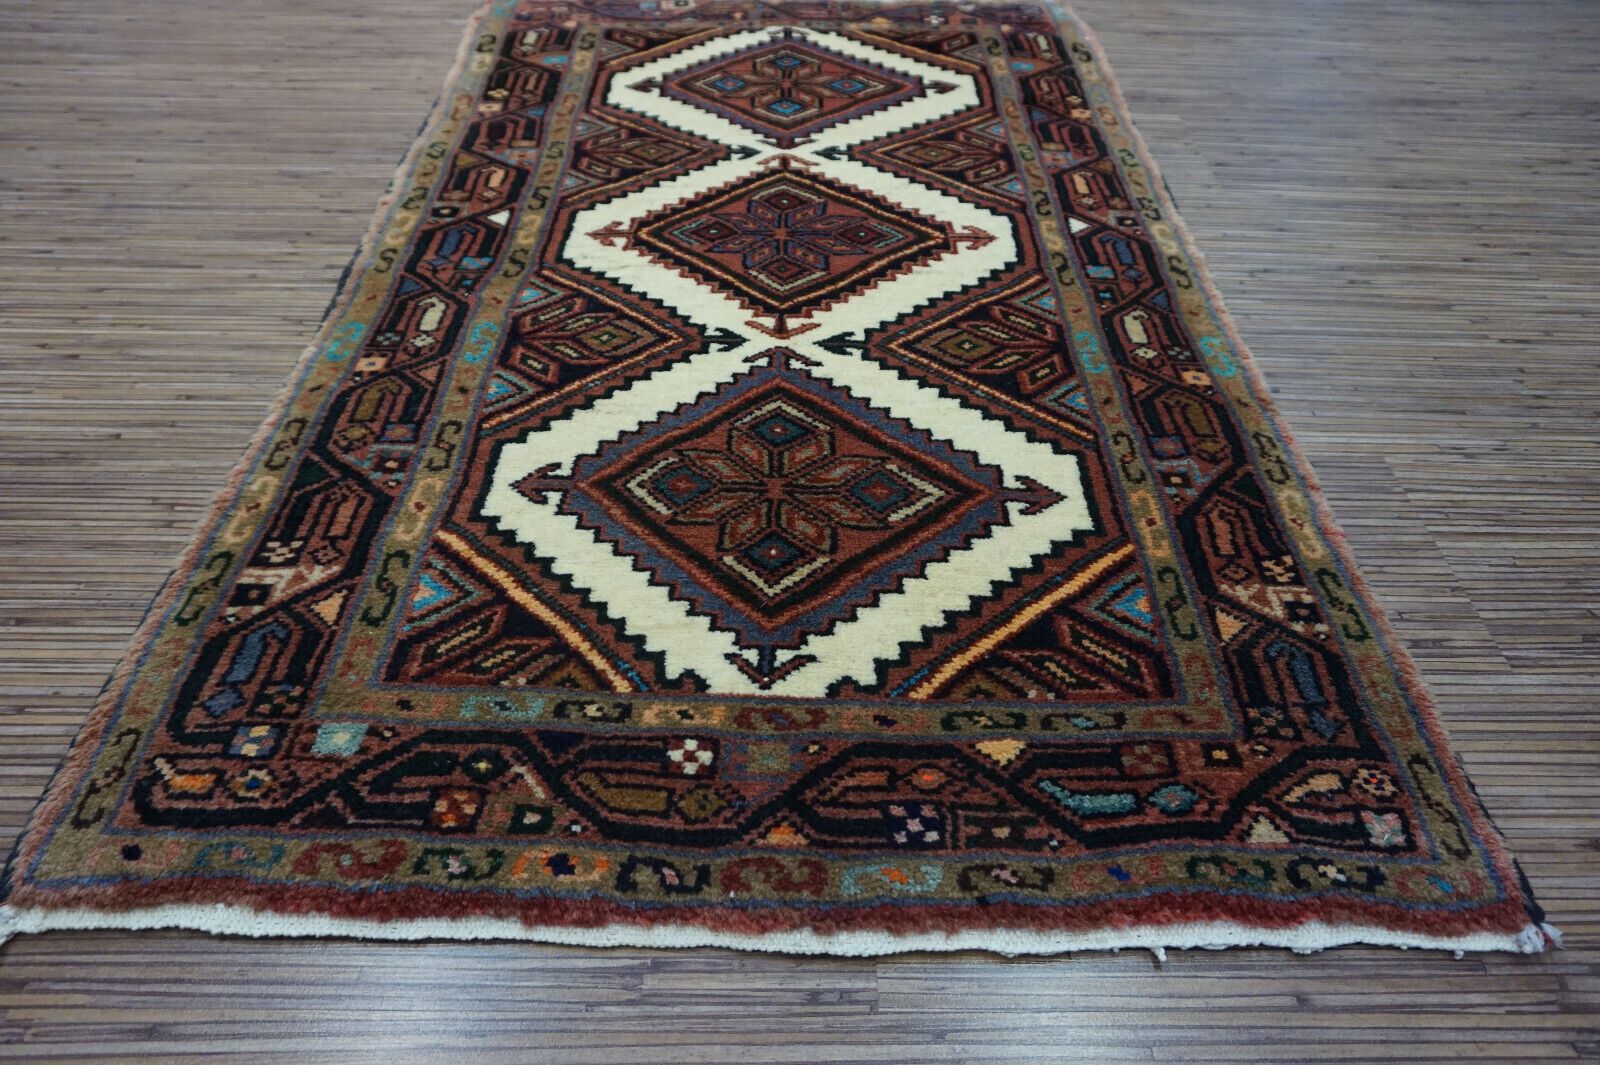 Good condition highlighted in a close-up view of the Hamadan Rug